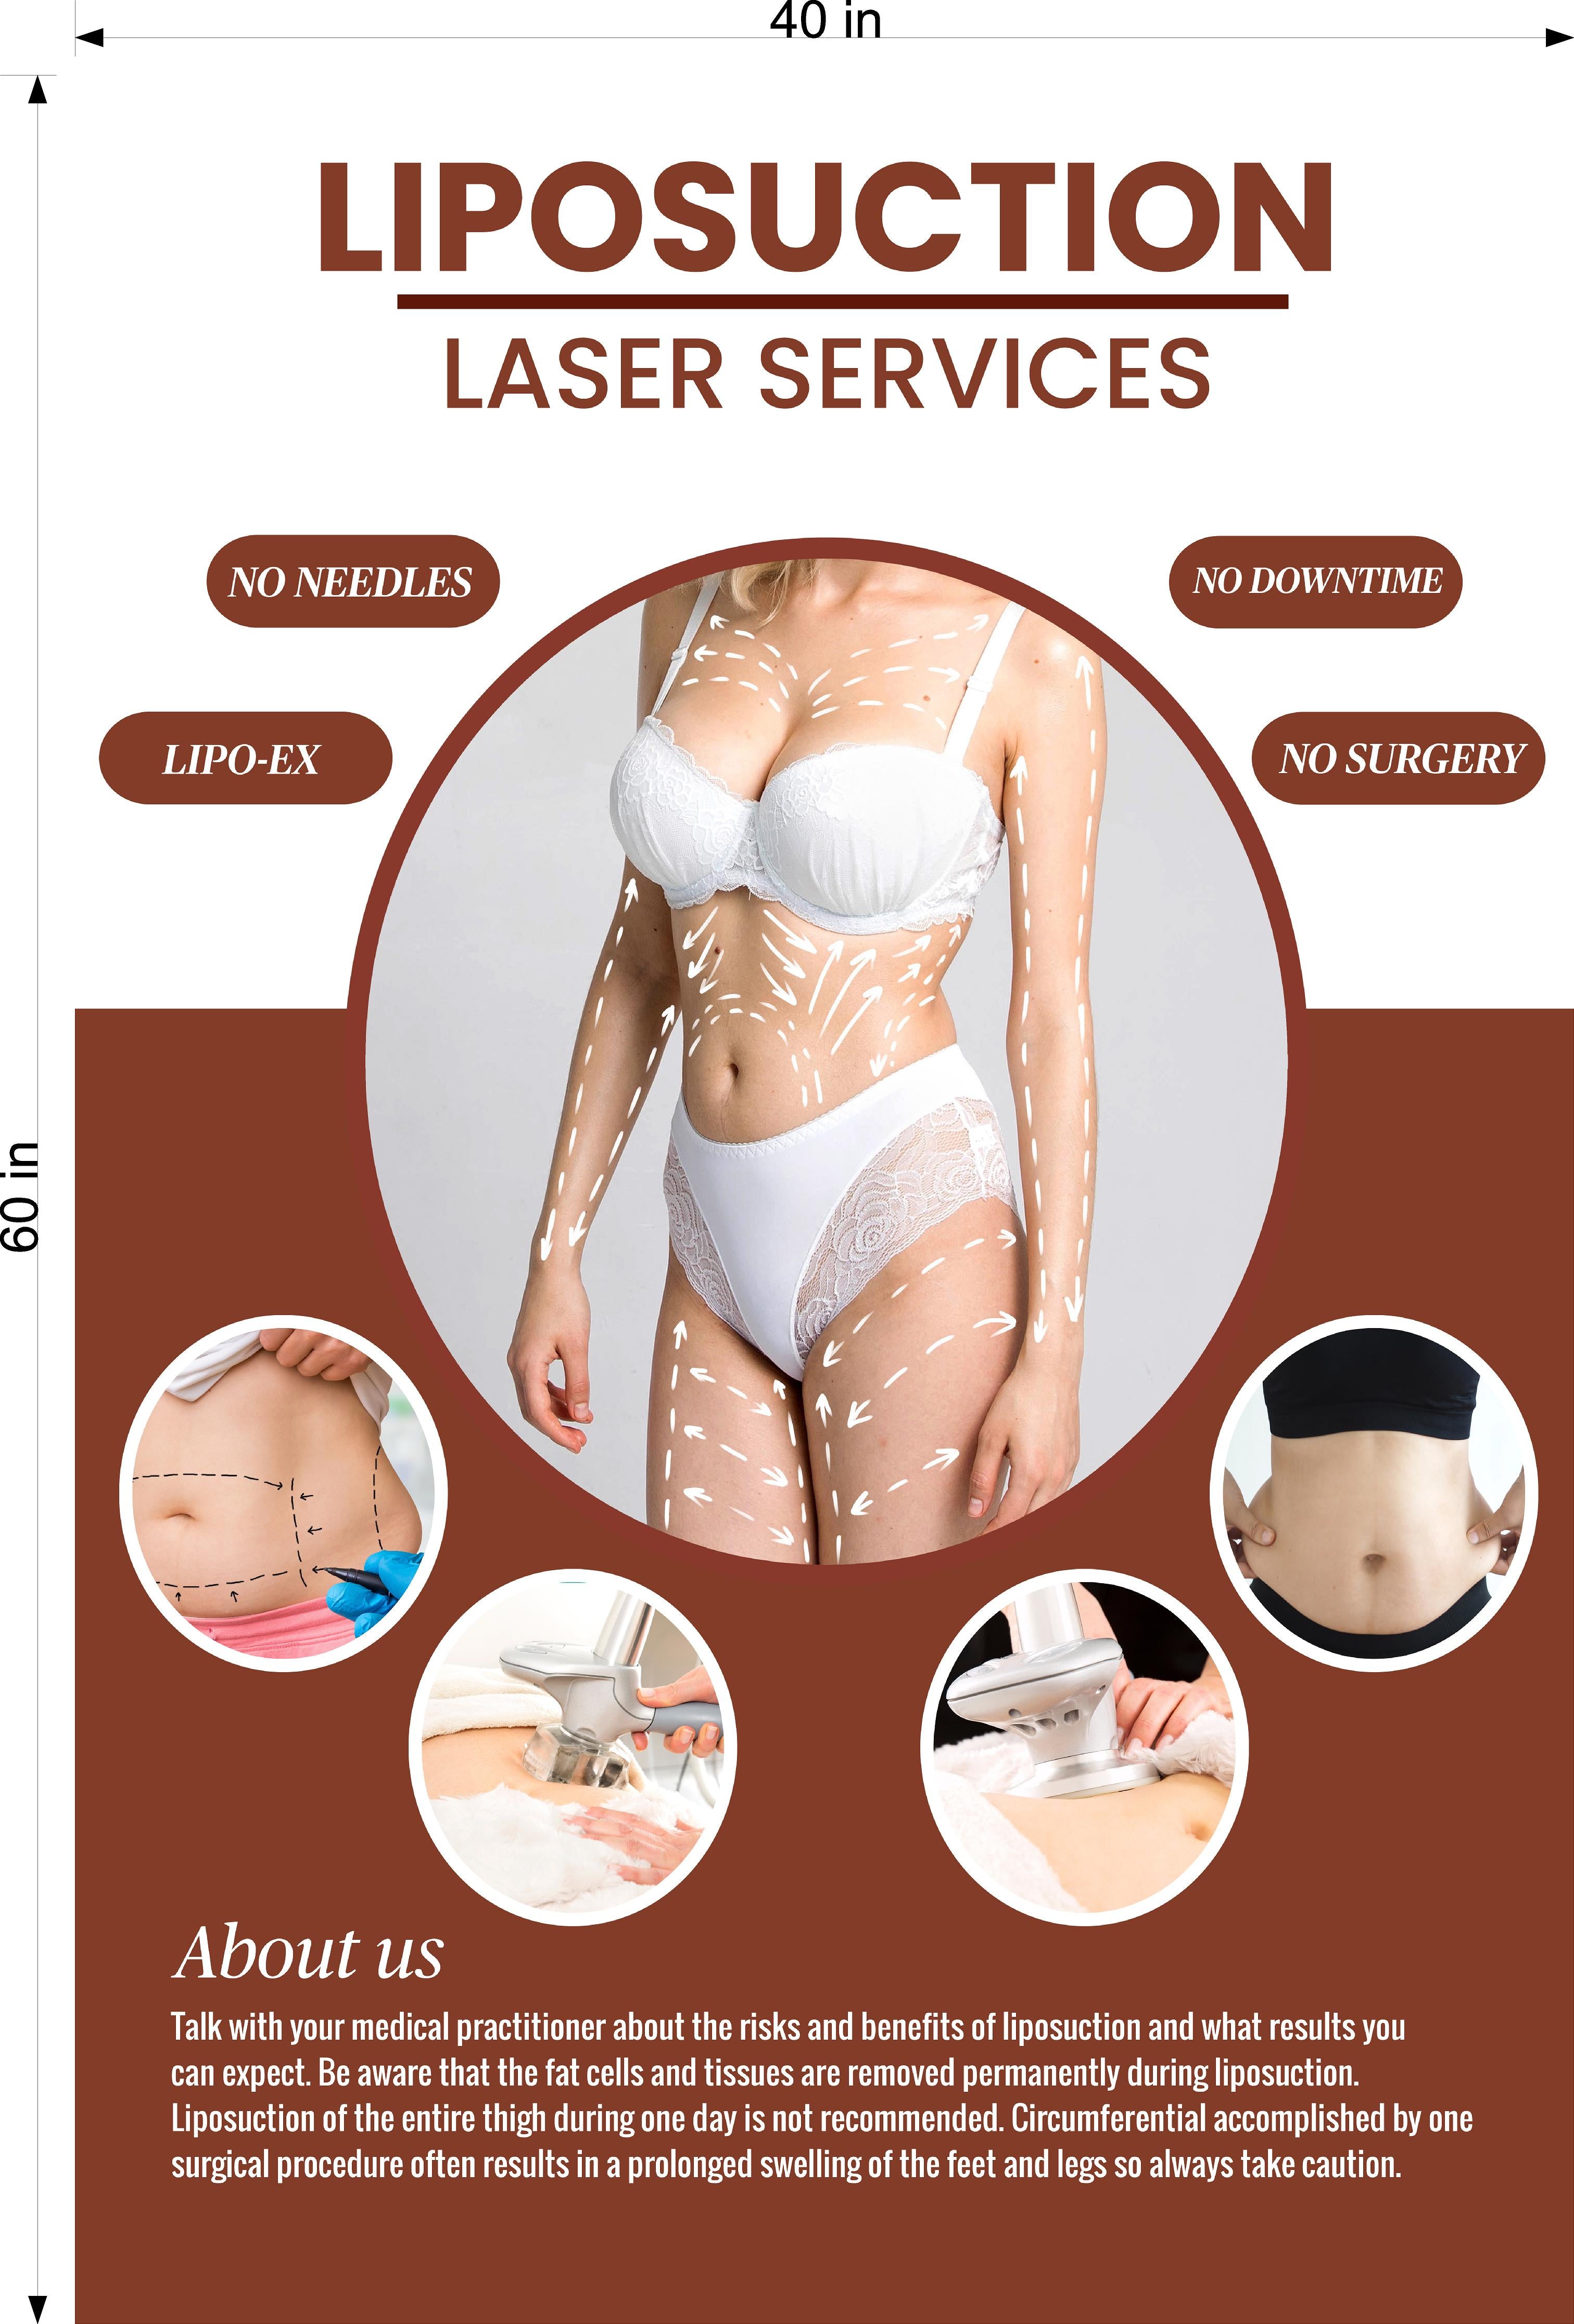 Liposuction 03 Perforated Mesh One Way Vision Window See-Through Sign Vinyl Plastic Surgery Procedure Obesity Cosmetic Vertical